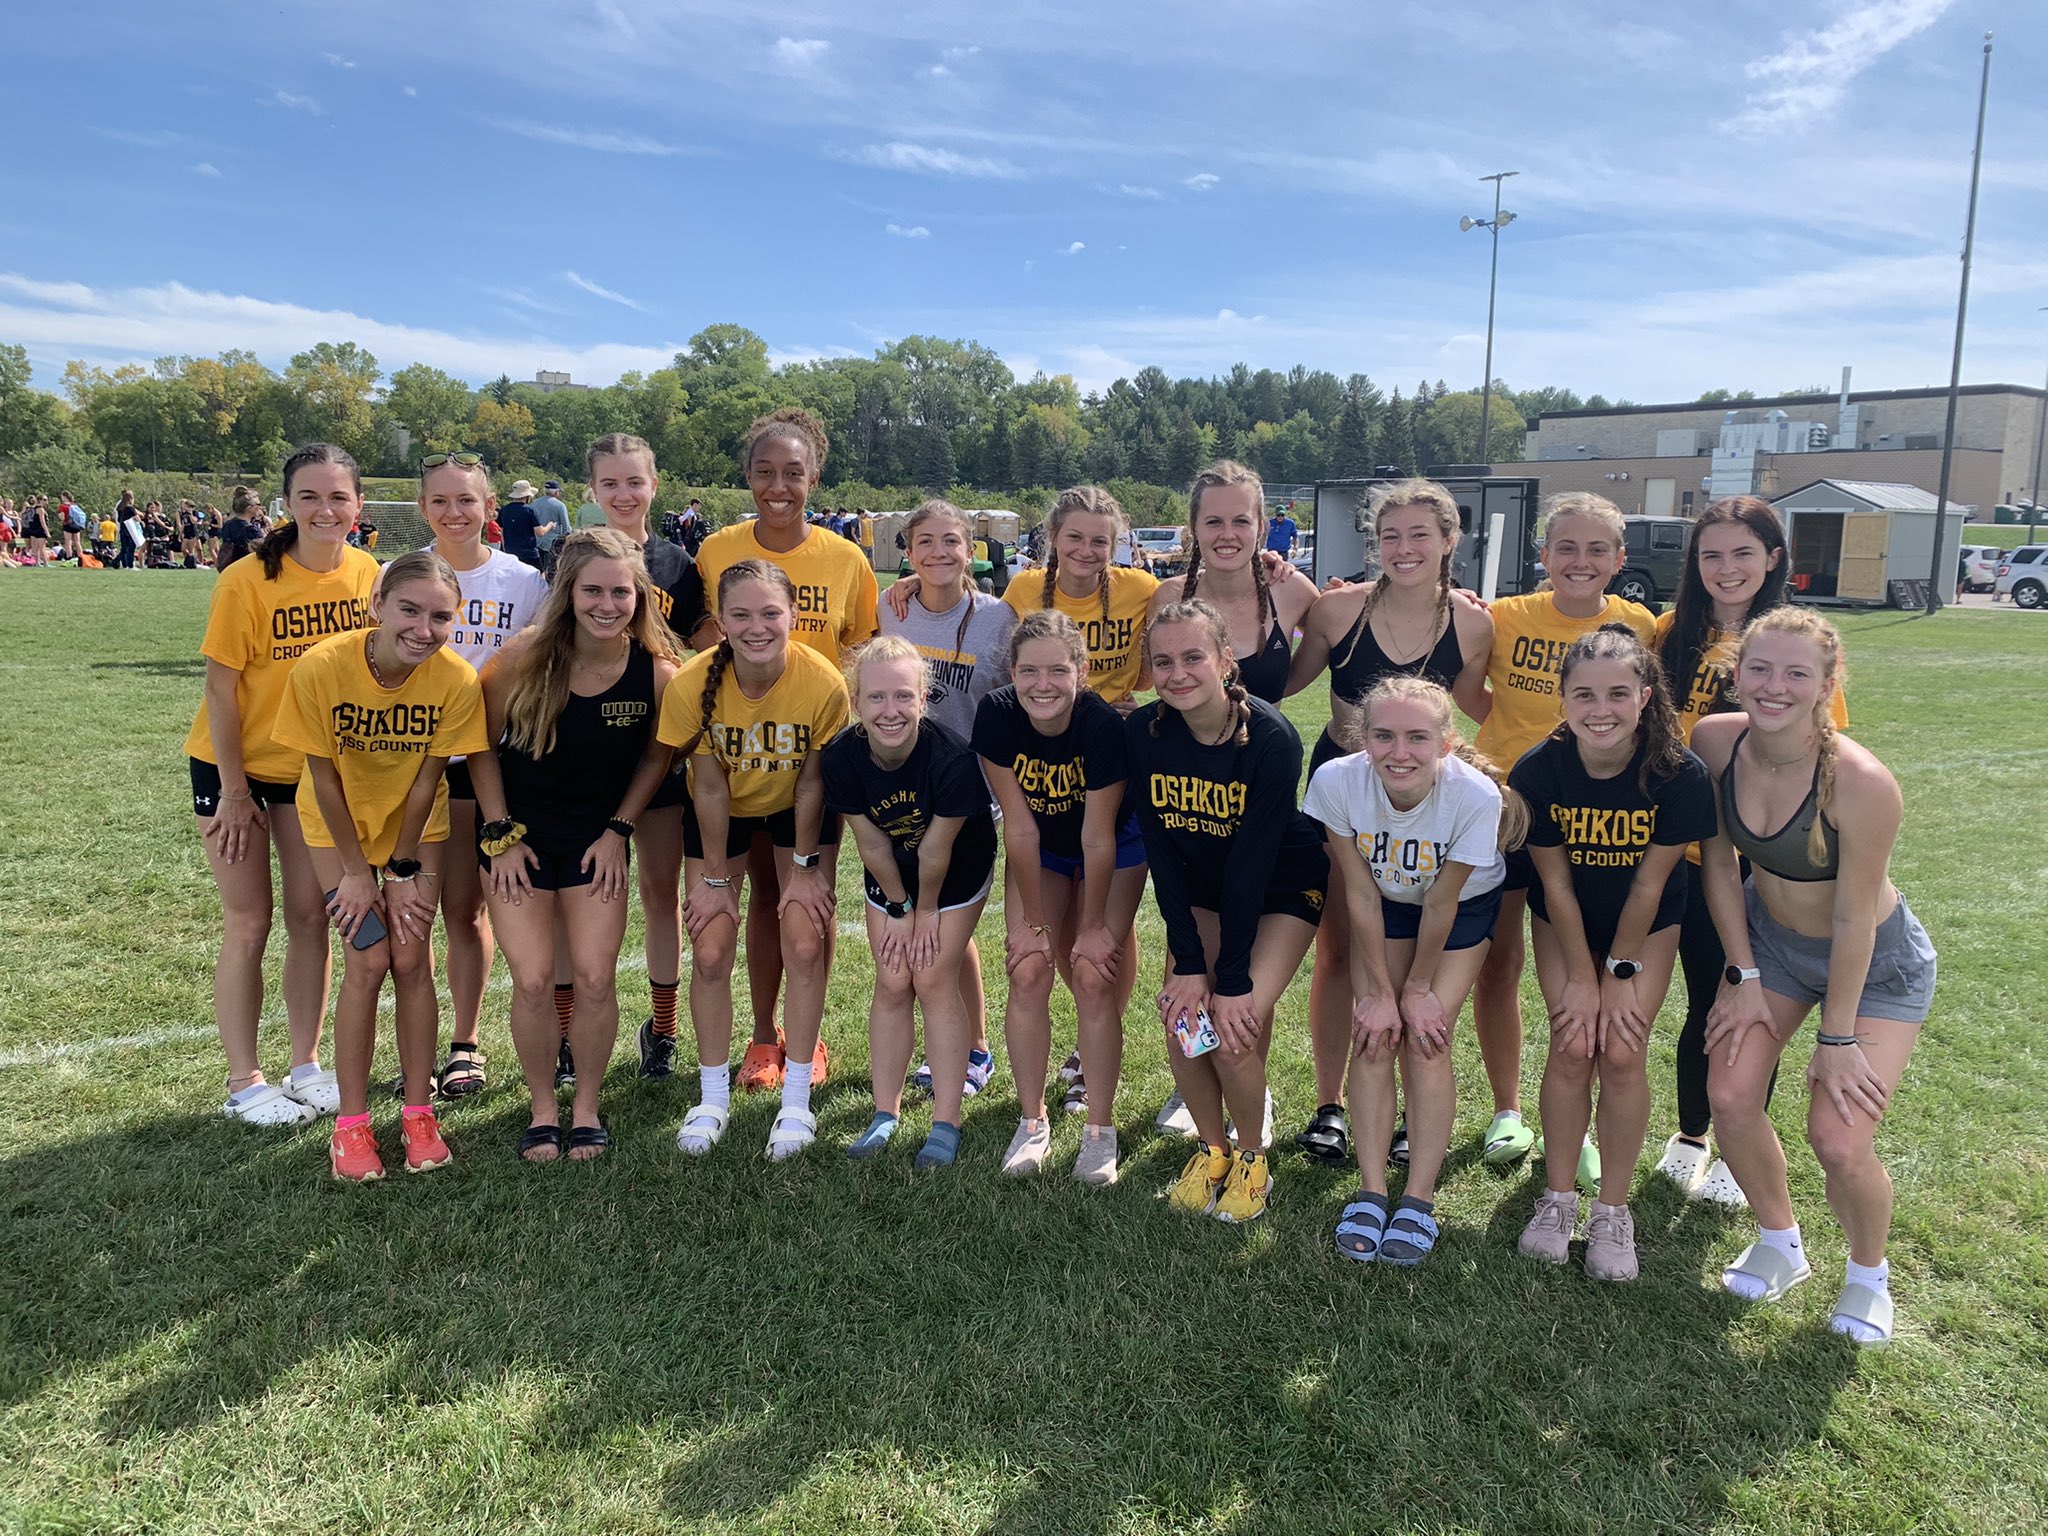 Women's Cross Country celebrates after big performances at St. Olaf 

PC: UWO Track and Field/Cross Country